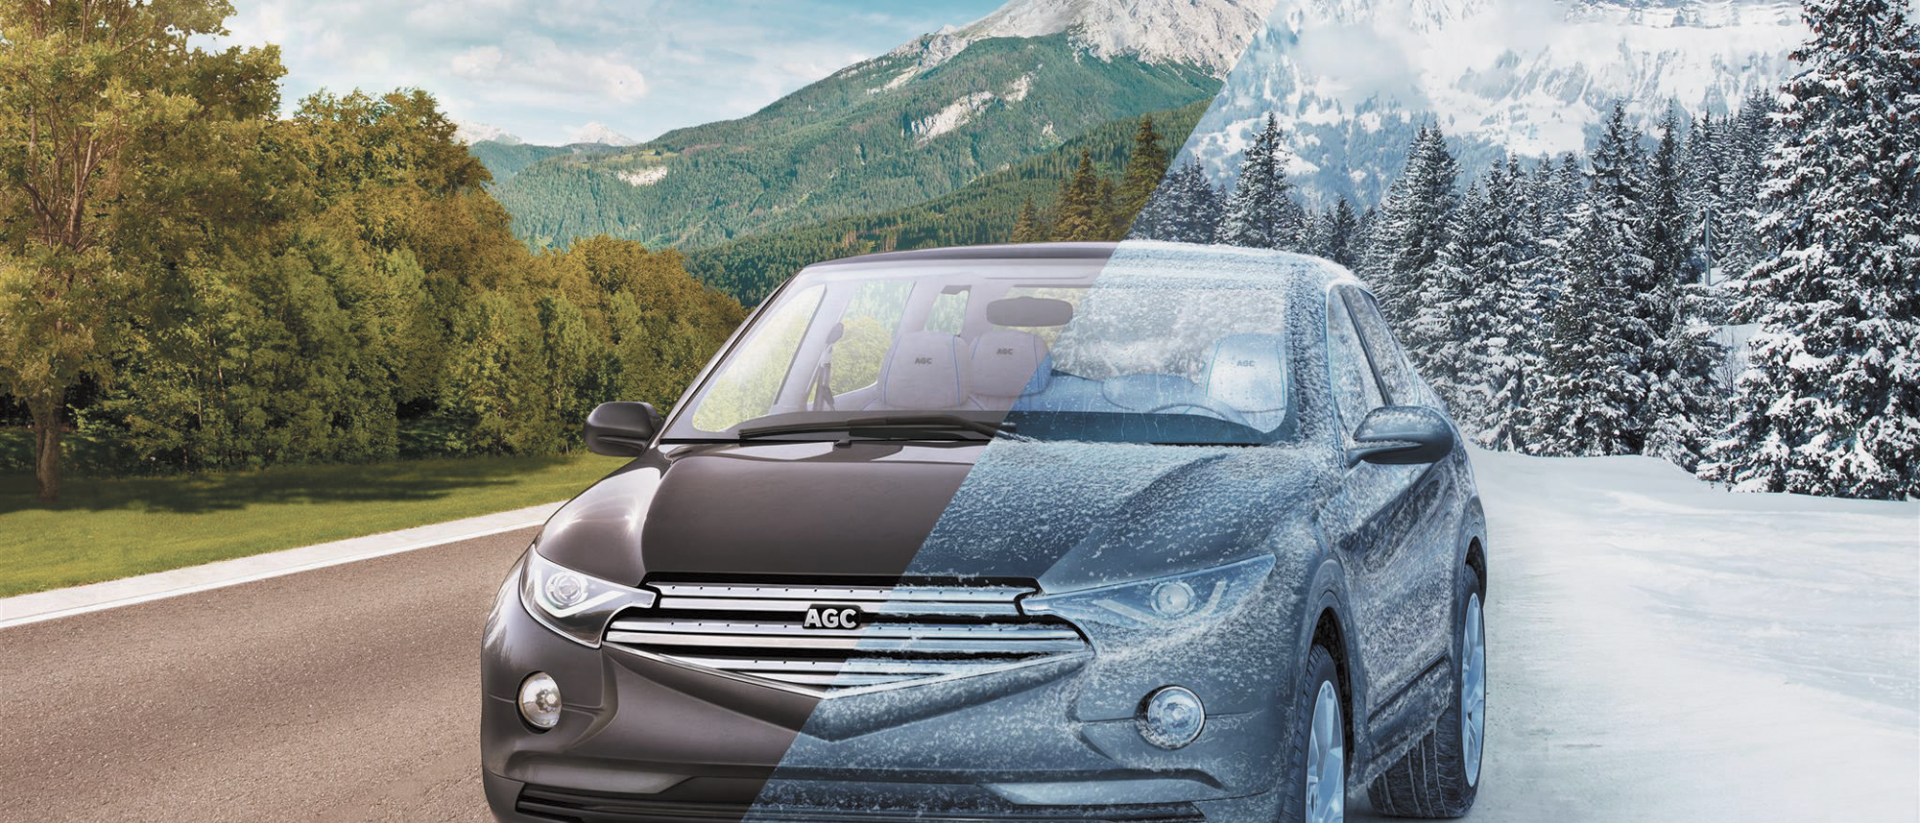 The windshield for all seasons comfort